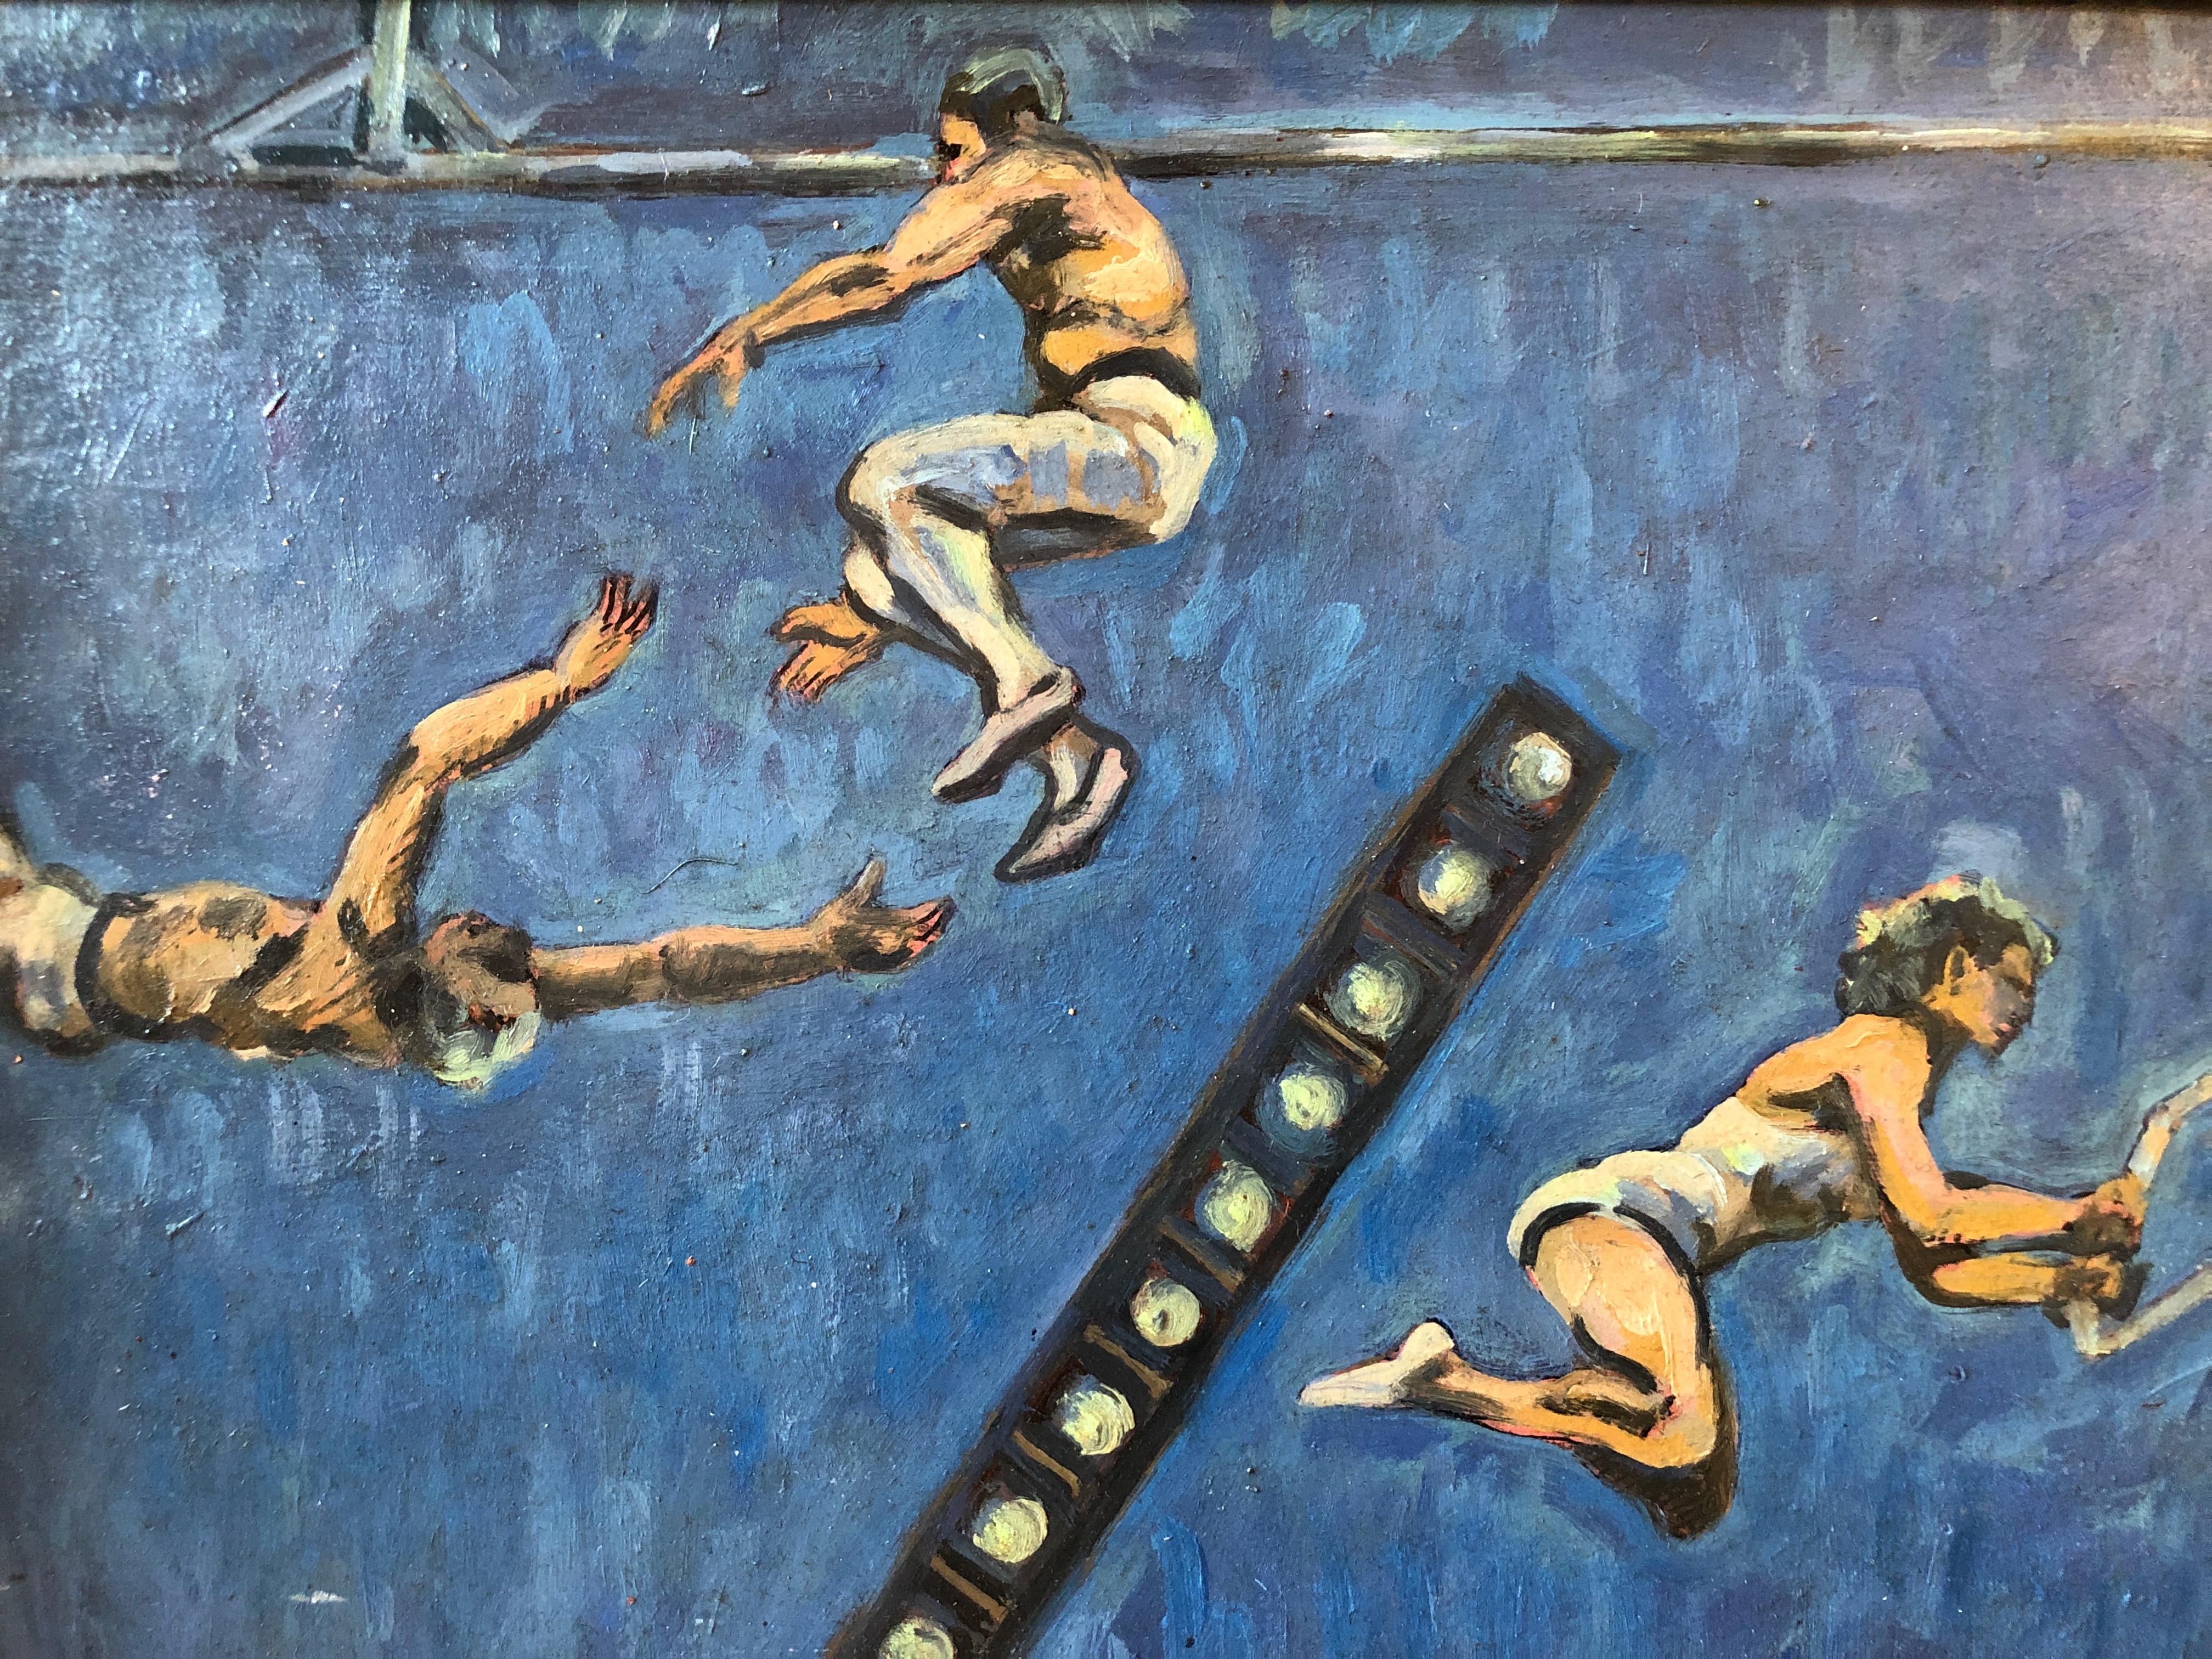 This is a colorful painting of acrobats swinging through the air on trapeze by artist A. Smith.